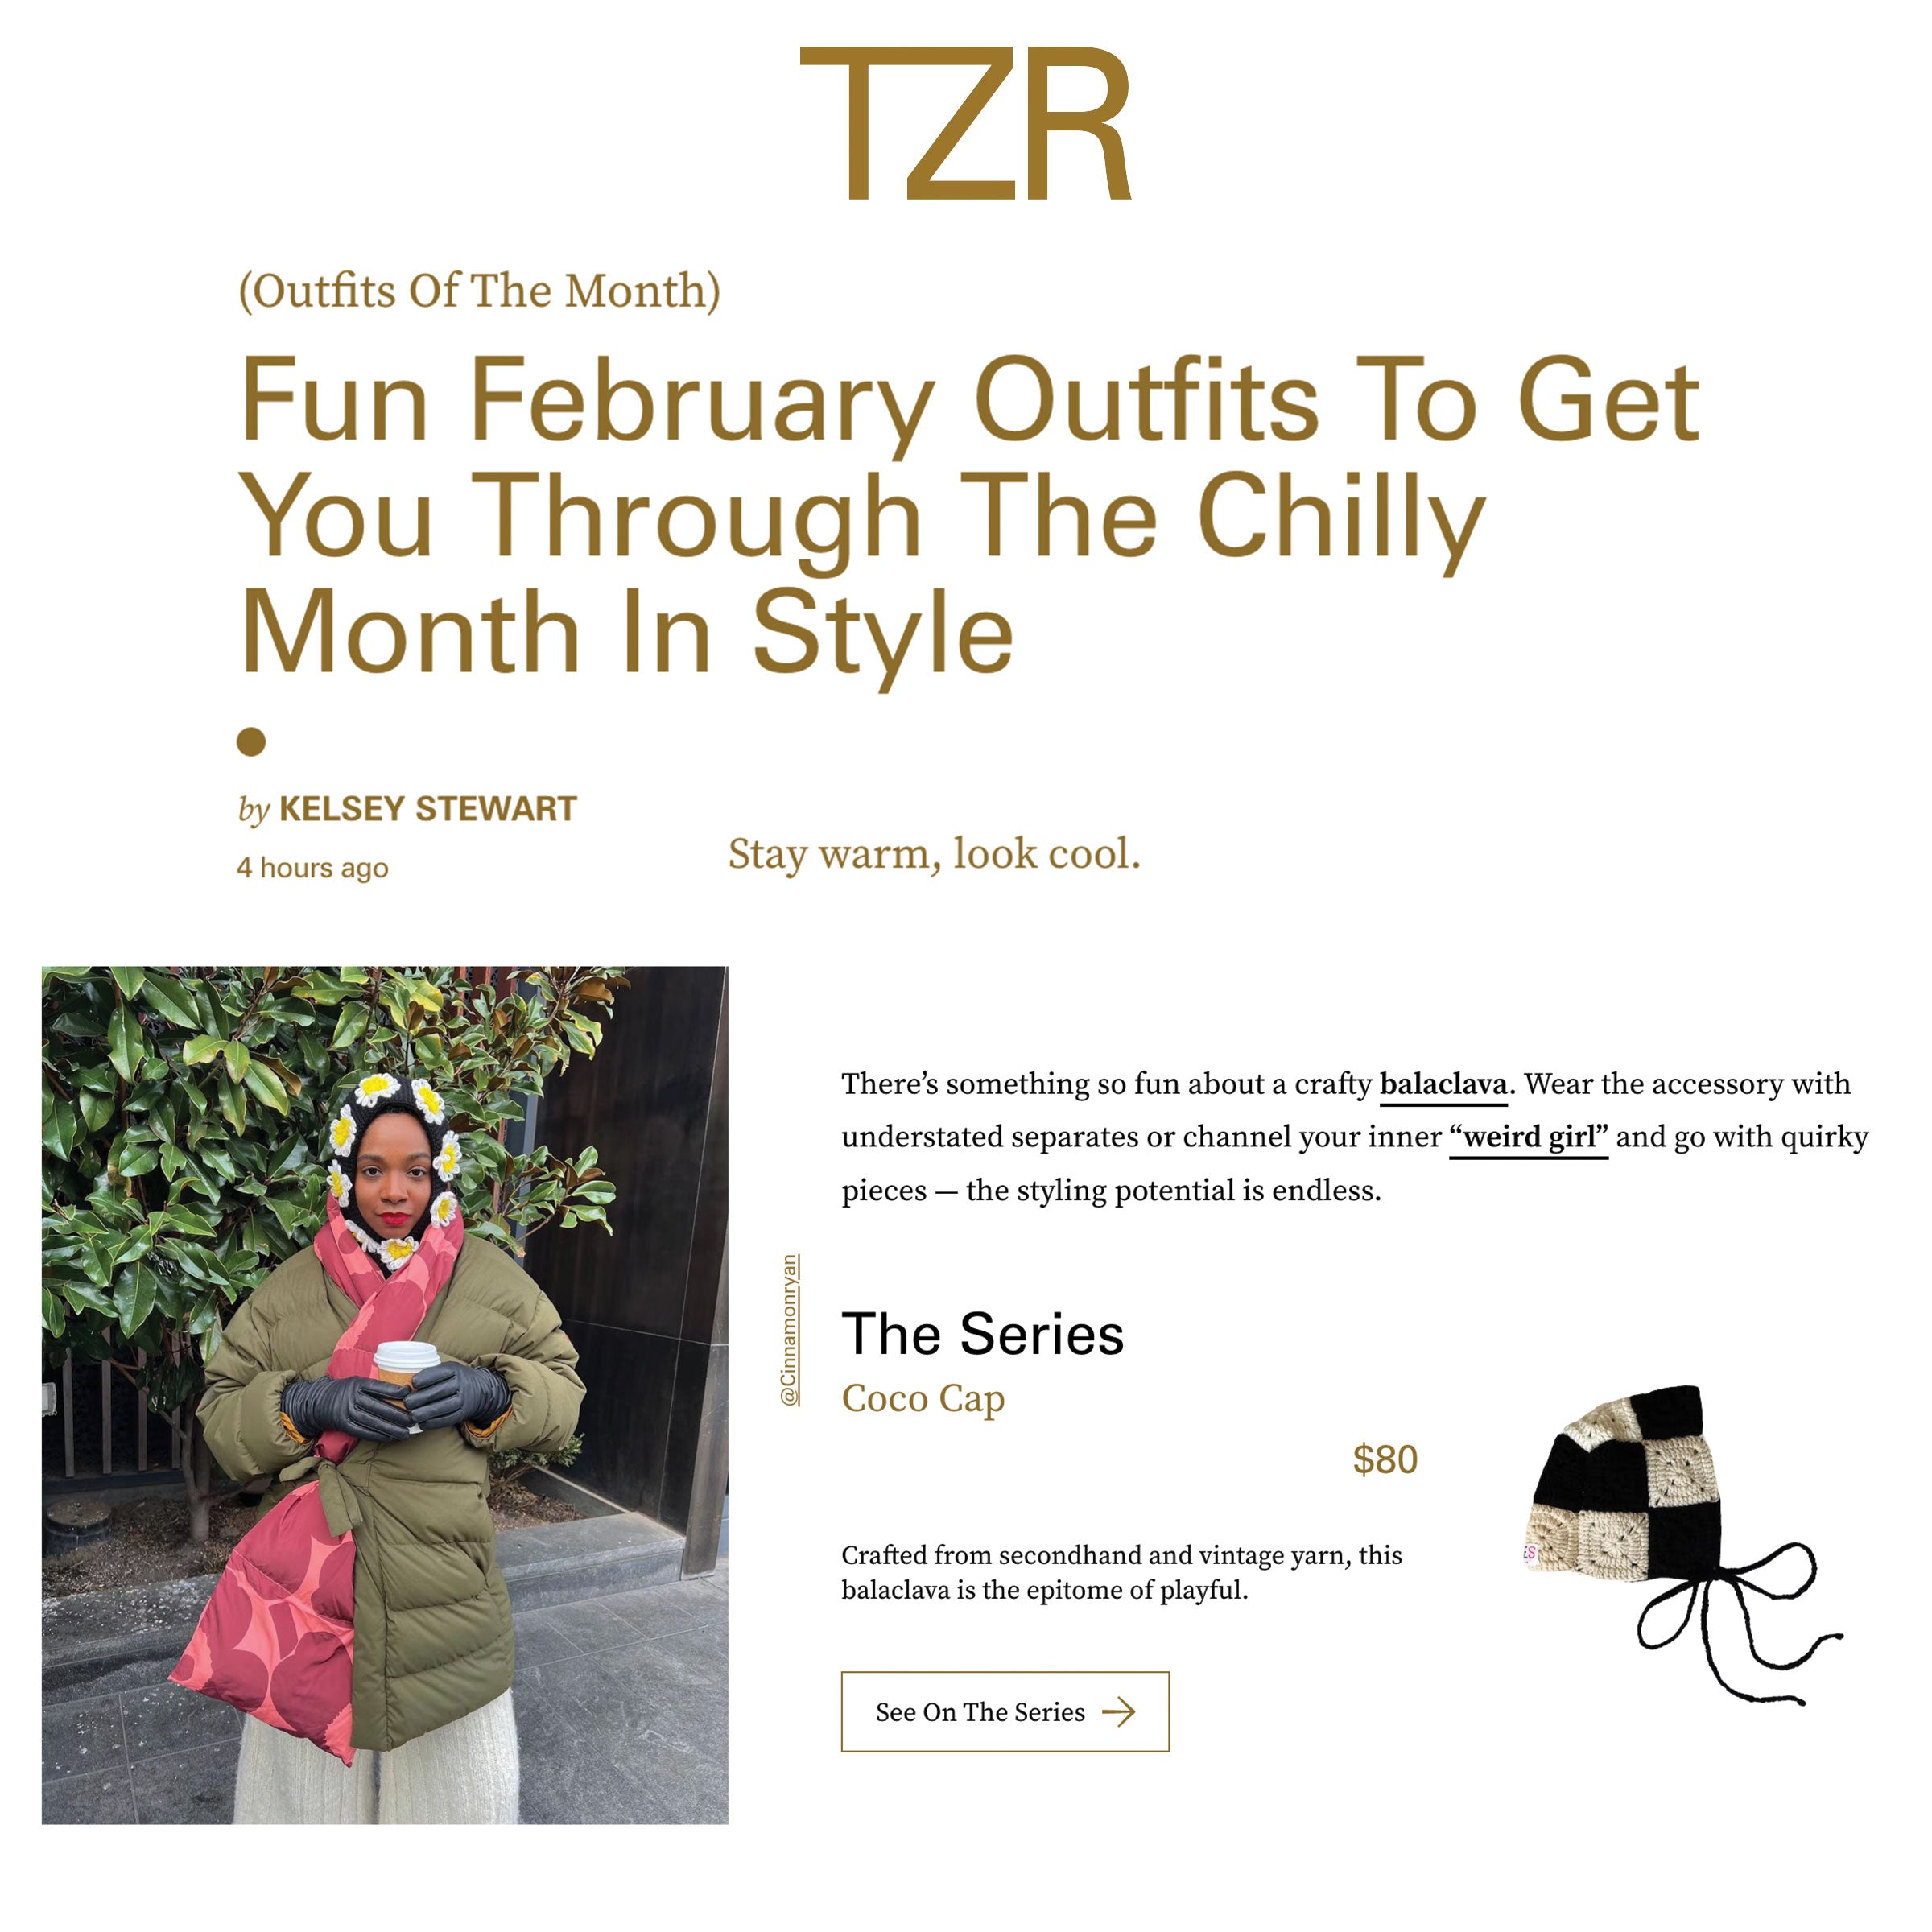 TZR | Fun February Outfits To Get You Through The Chilly Month In Style